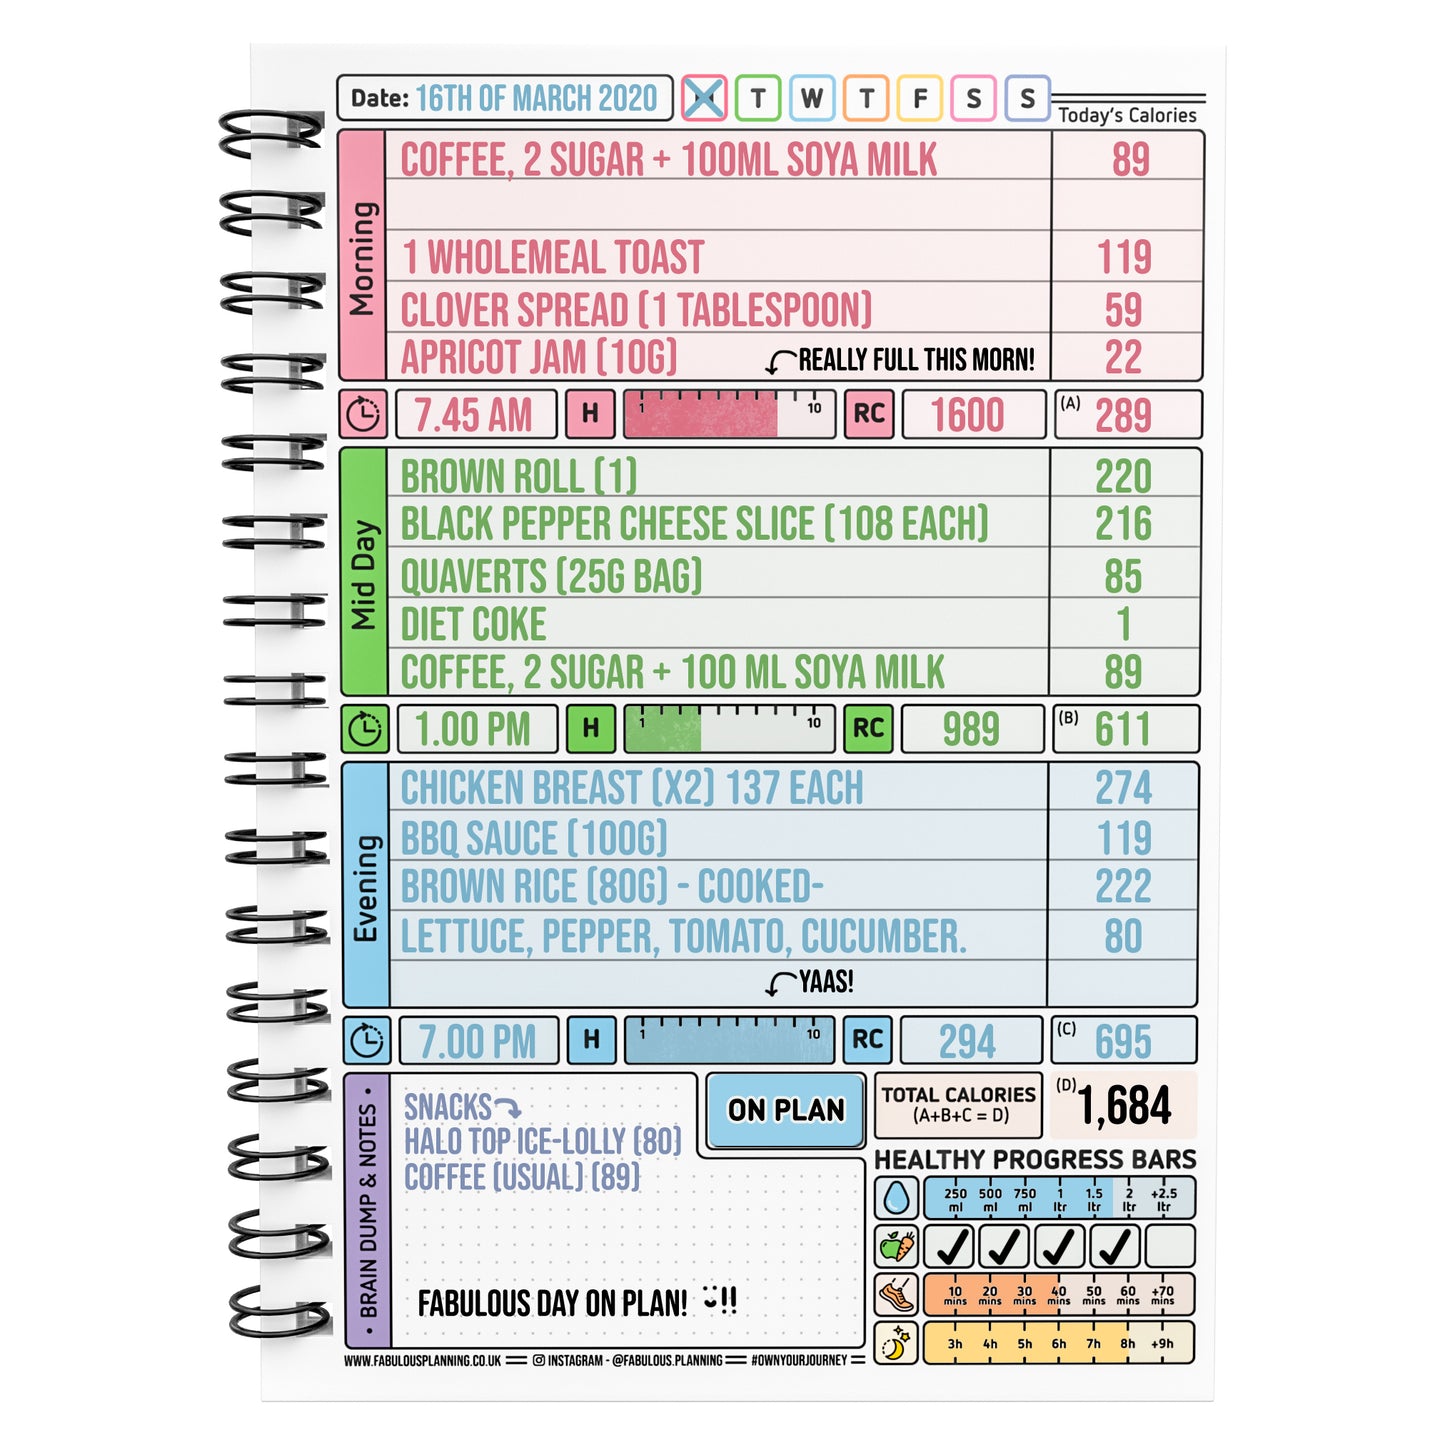 Food Diary - C63 - Calorie Counting